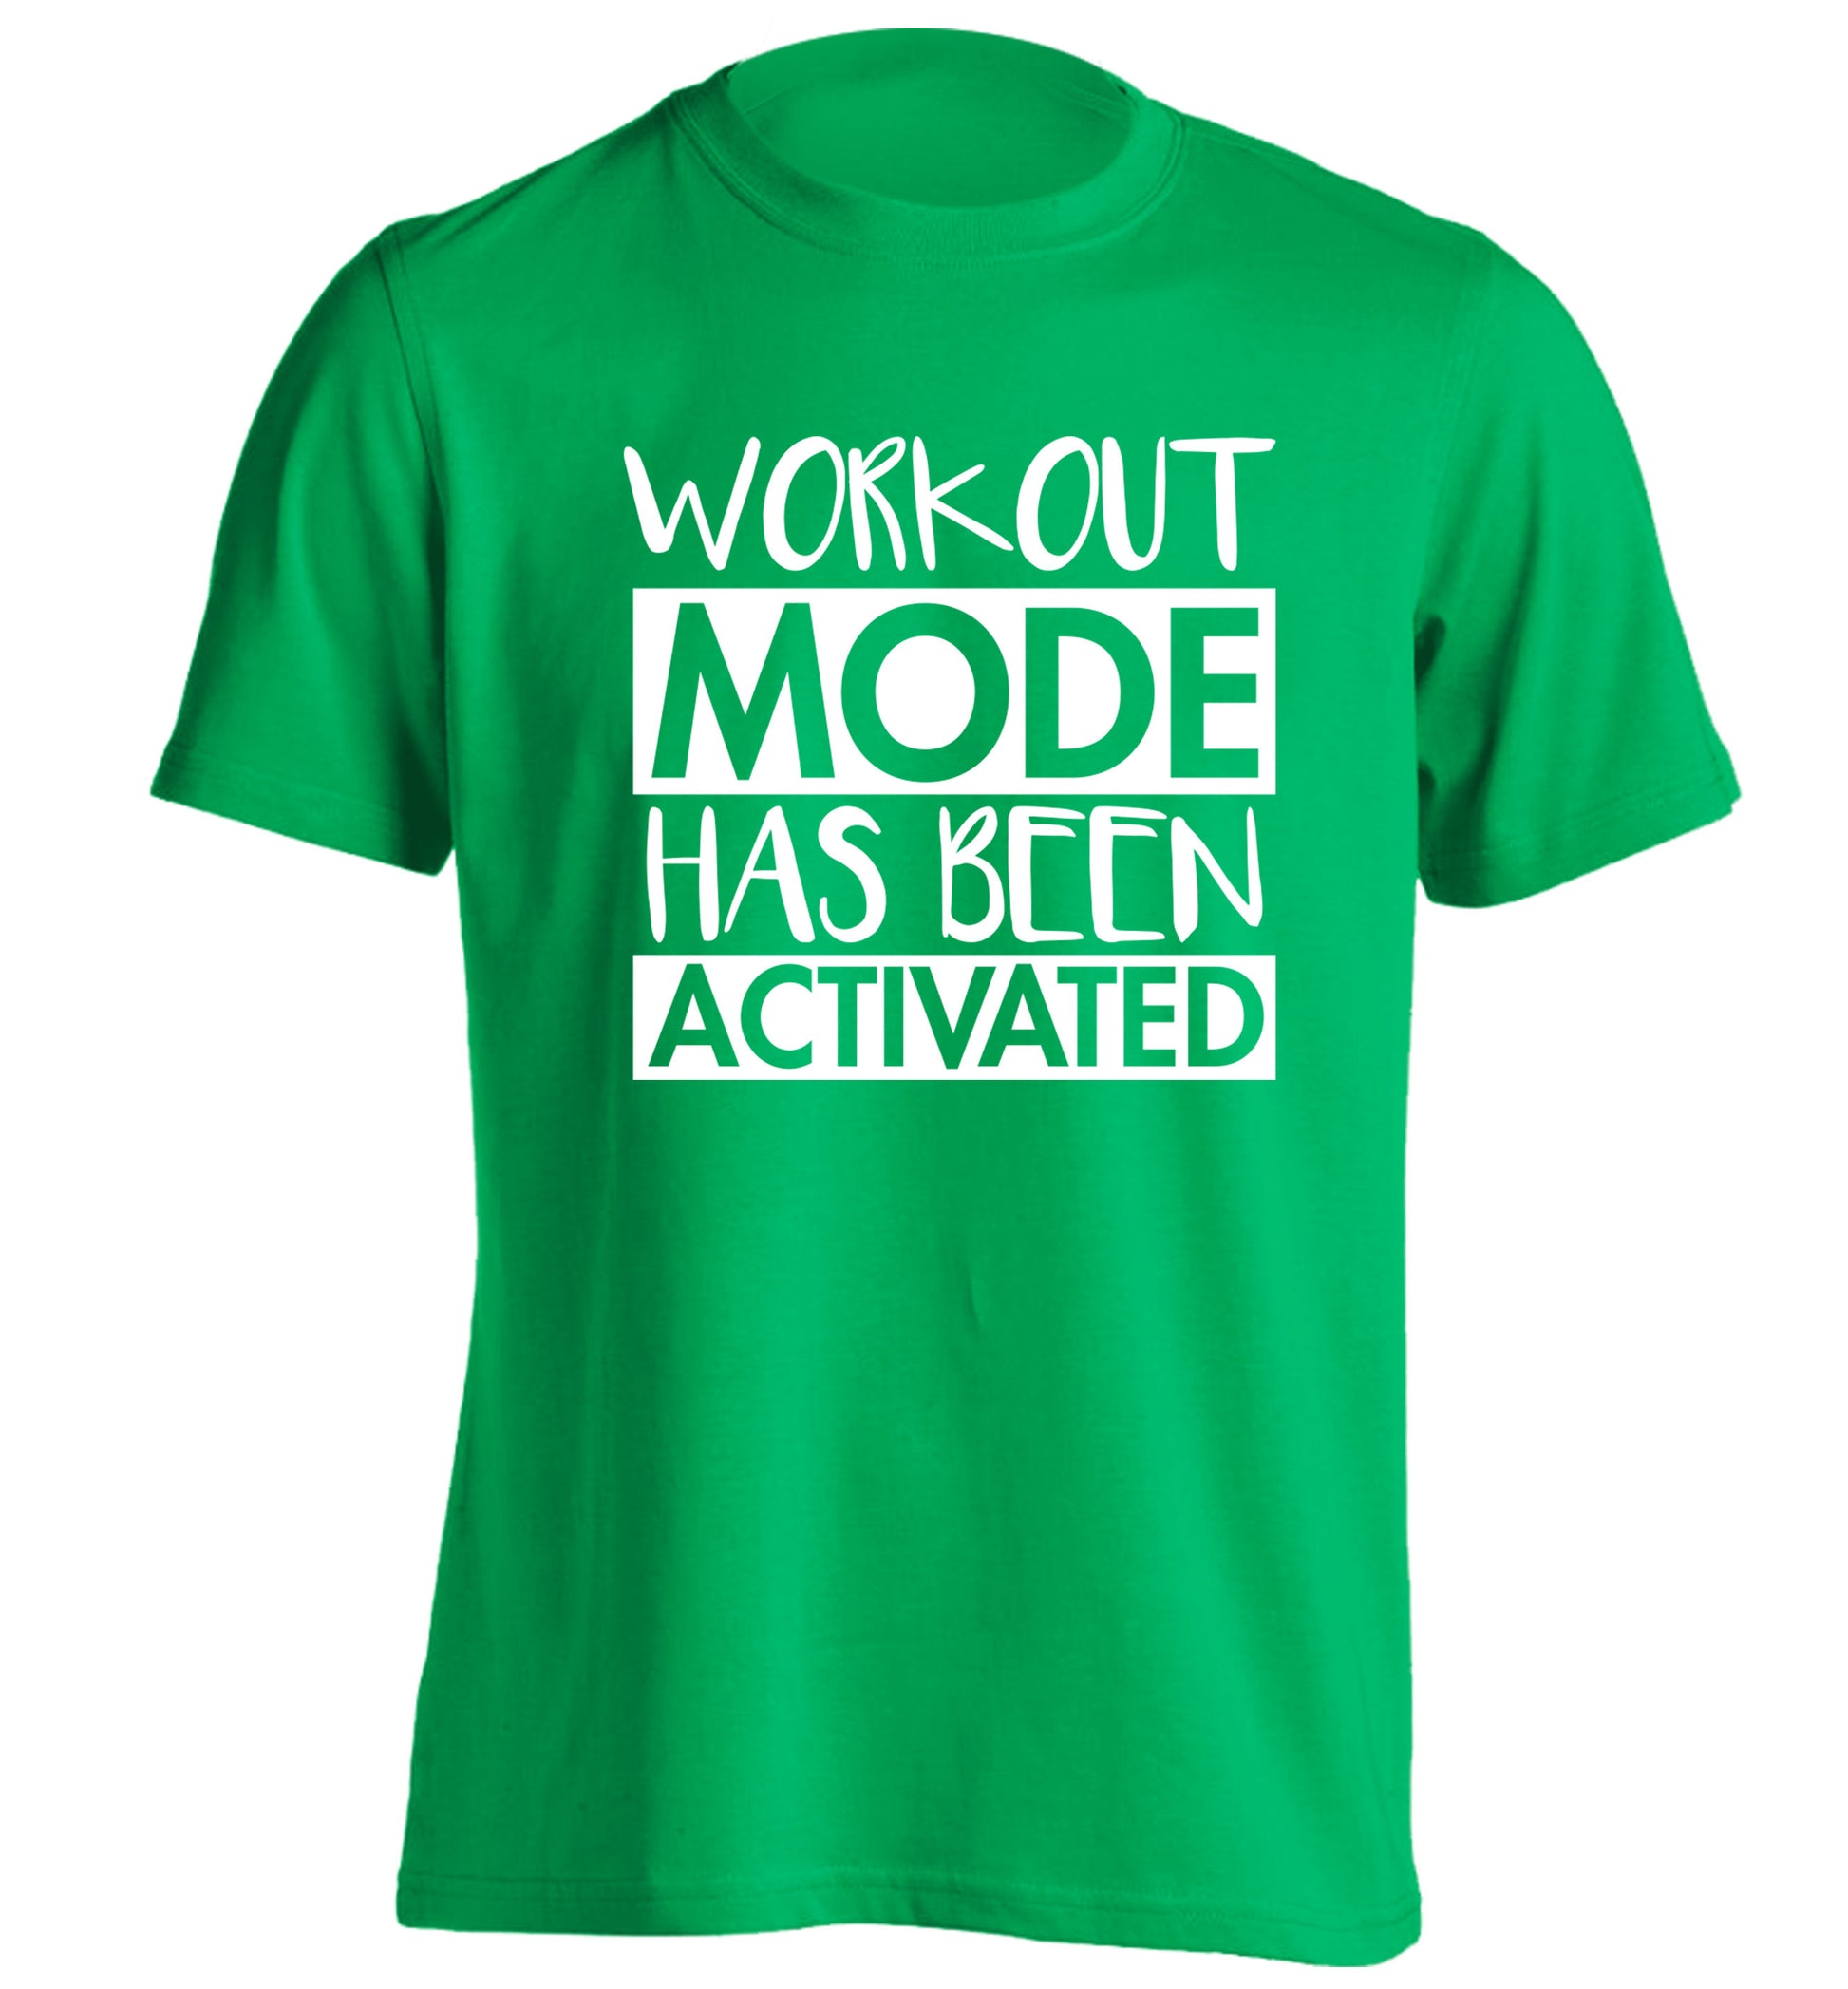 Workout mode has been activated adults unisex green Tshirt 2XL